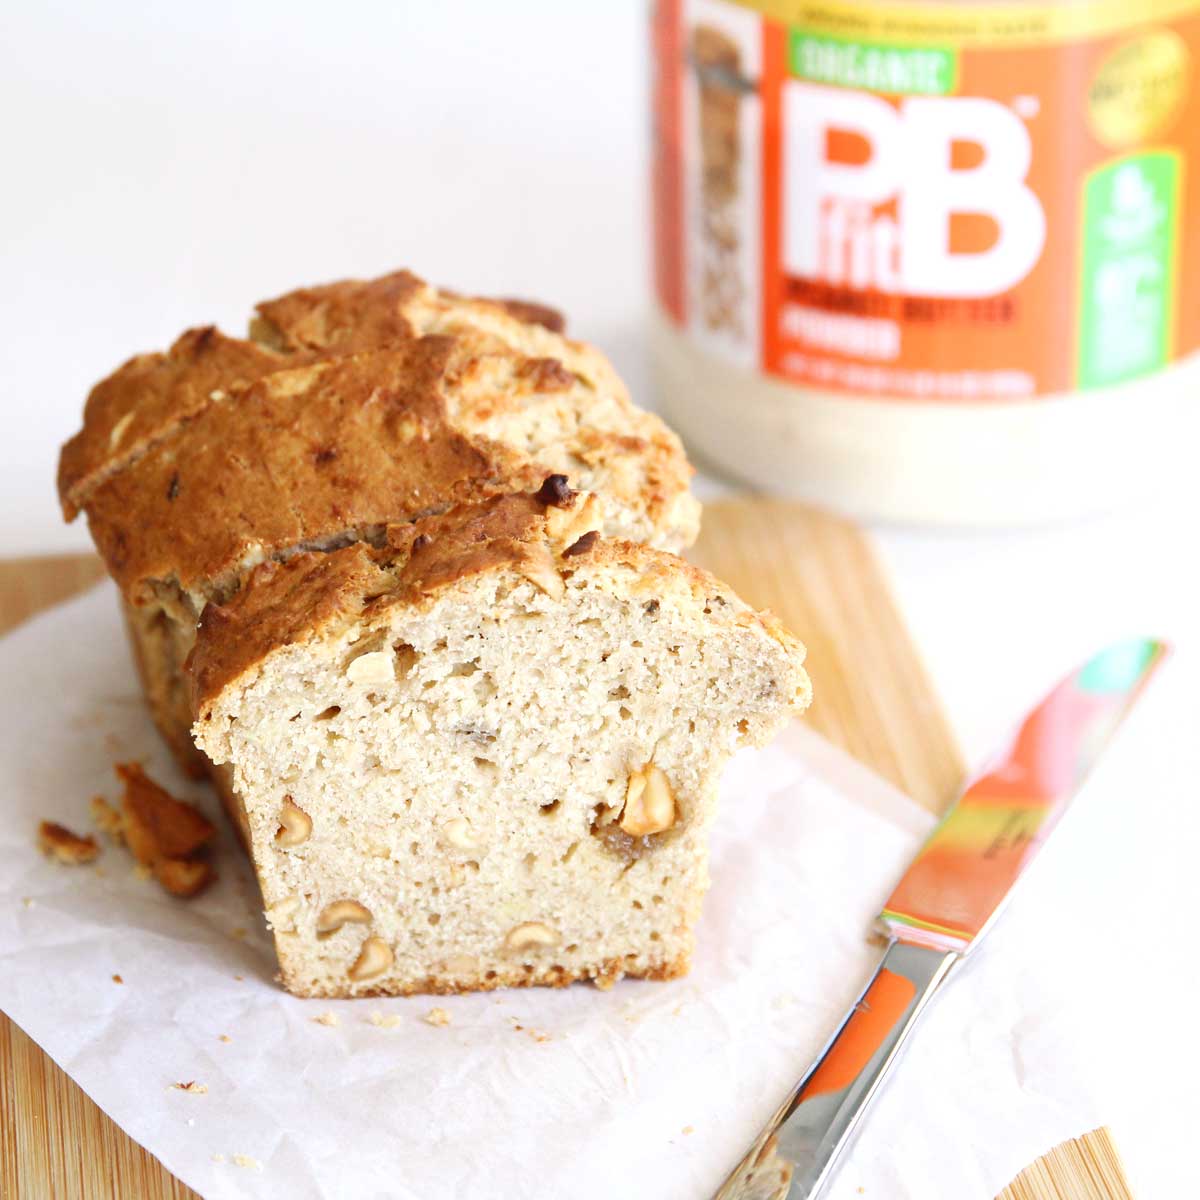 High Protein PB Fit Peanut Butter Banana Bread (Dairy Free, Egg Free Recipe) - Peanut Butter Banana Bread